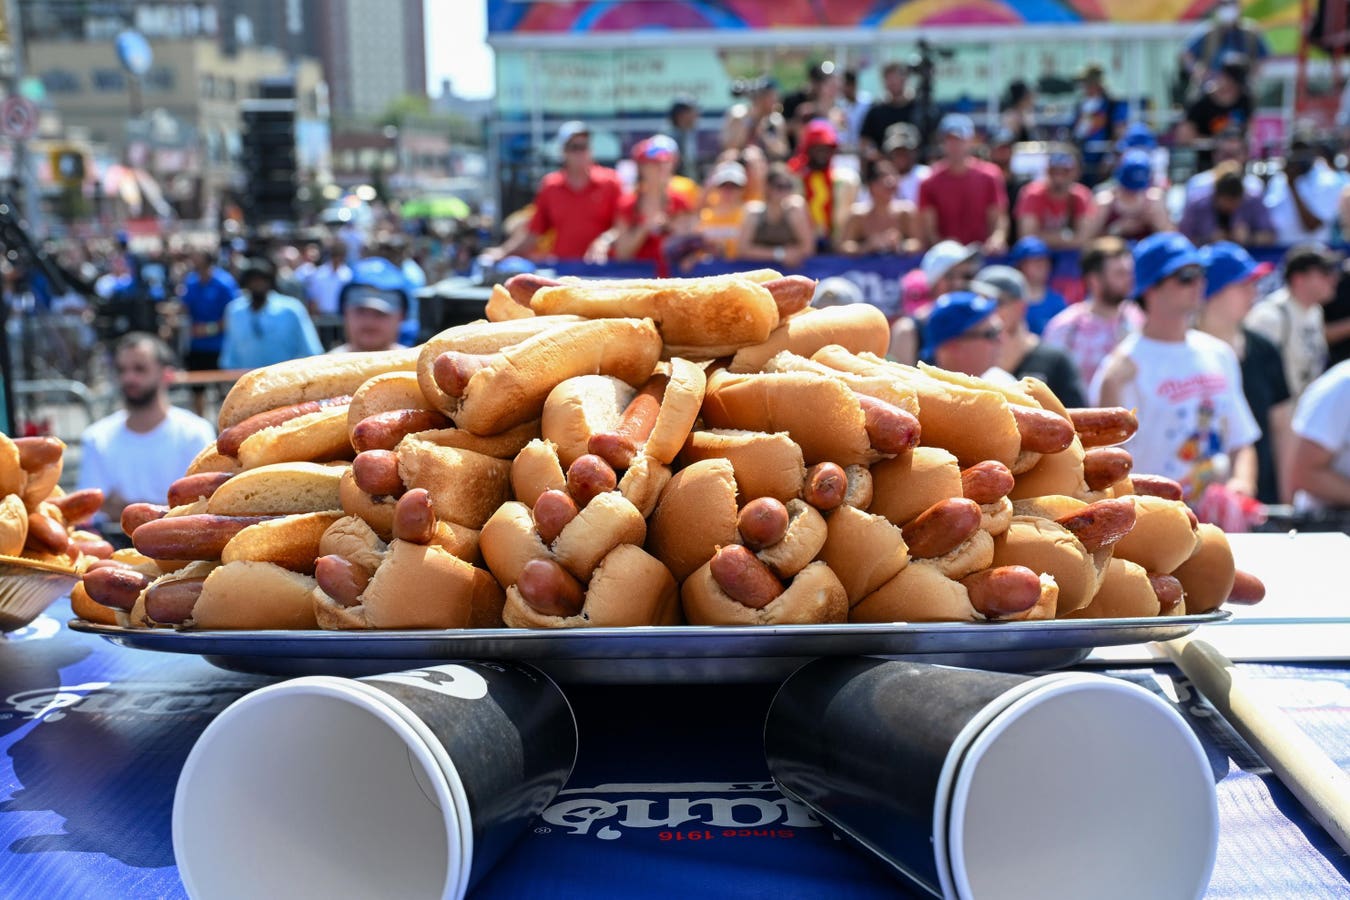 Peak Hot Dog Season Began Memorial Day, Here Are The Health Issues